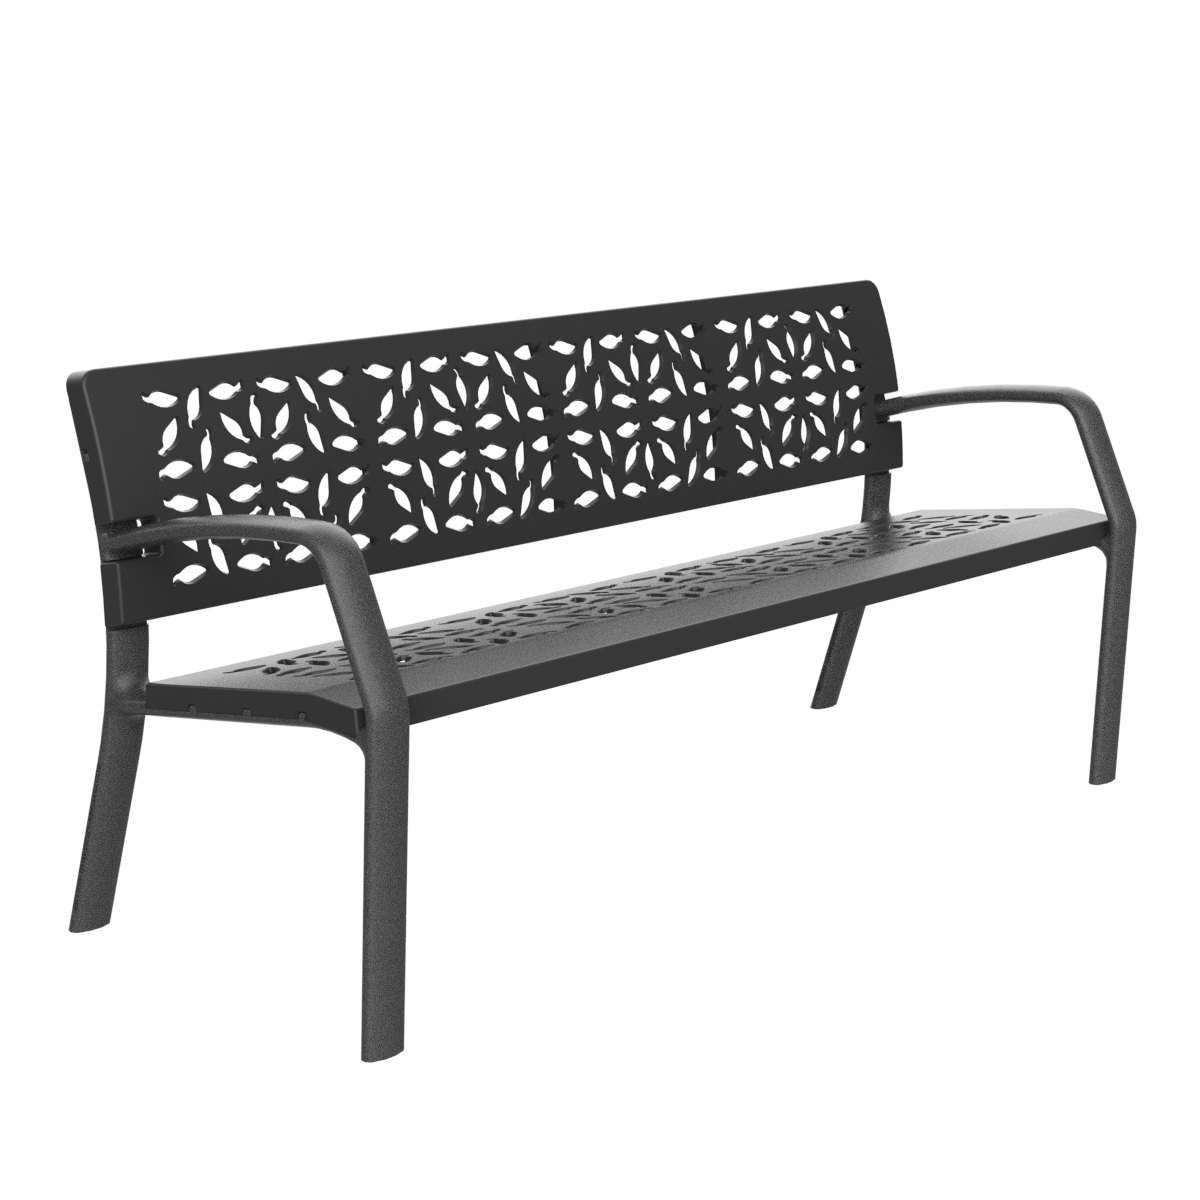 Casting Laforest Bench Urban Furniture Parks And Gardens C 1011 